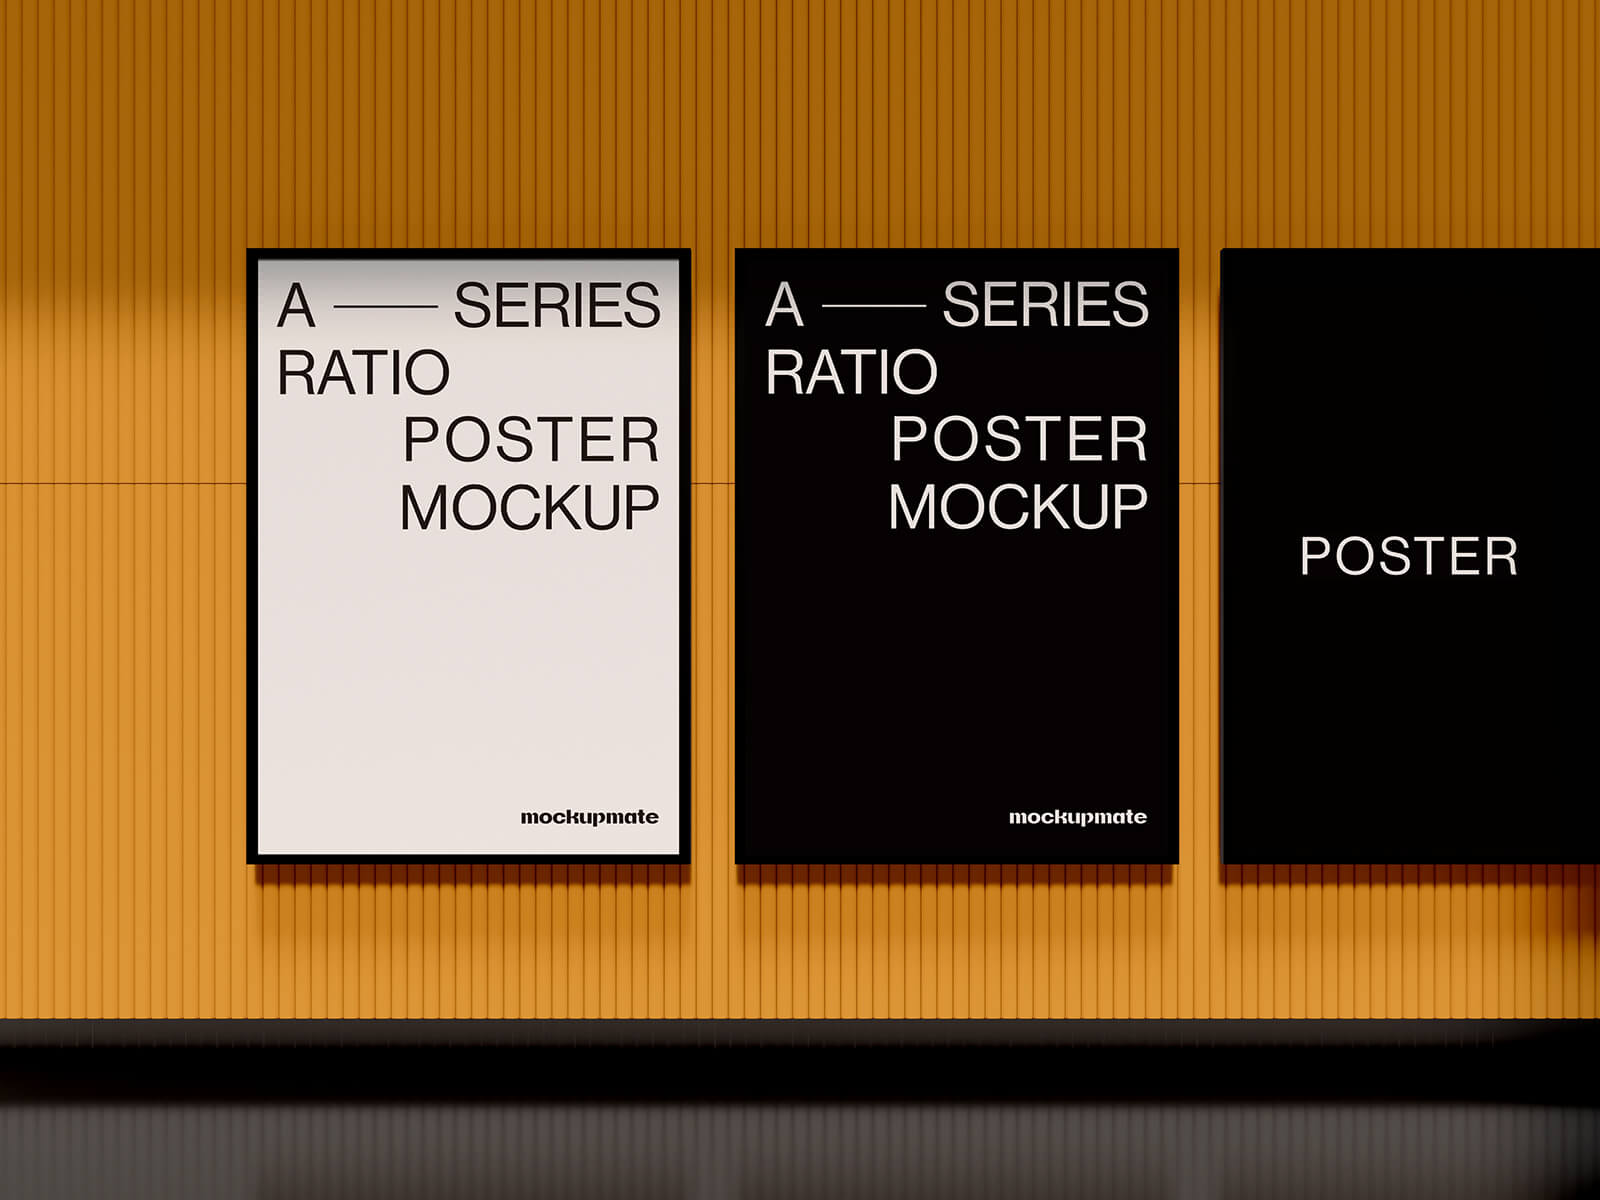 Free Lined-up Street Posters Mockup PSD